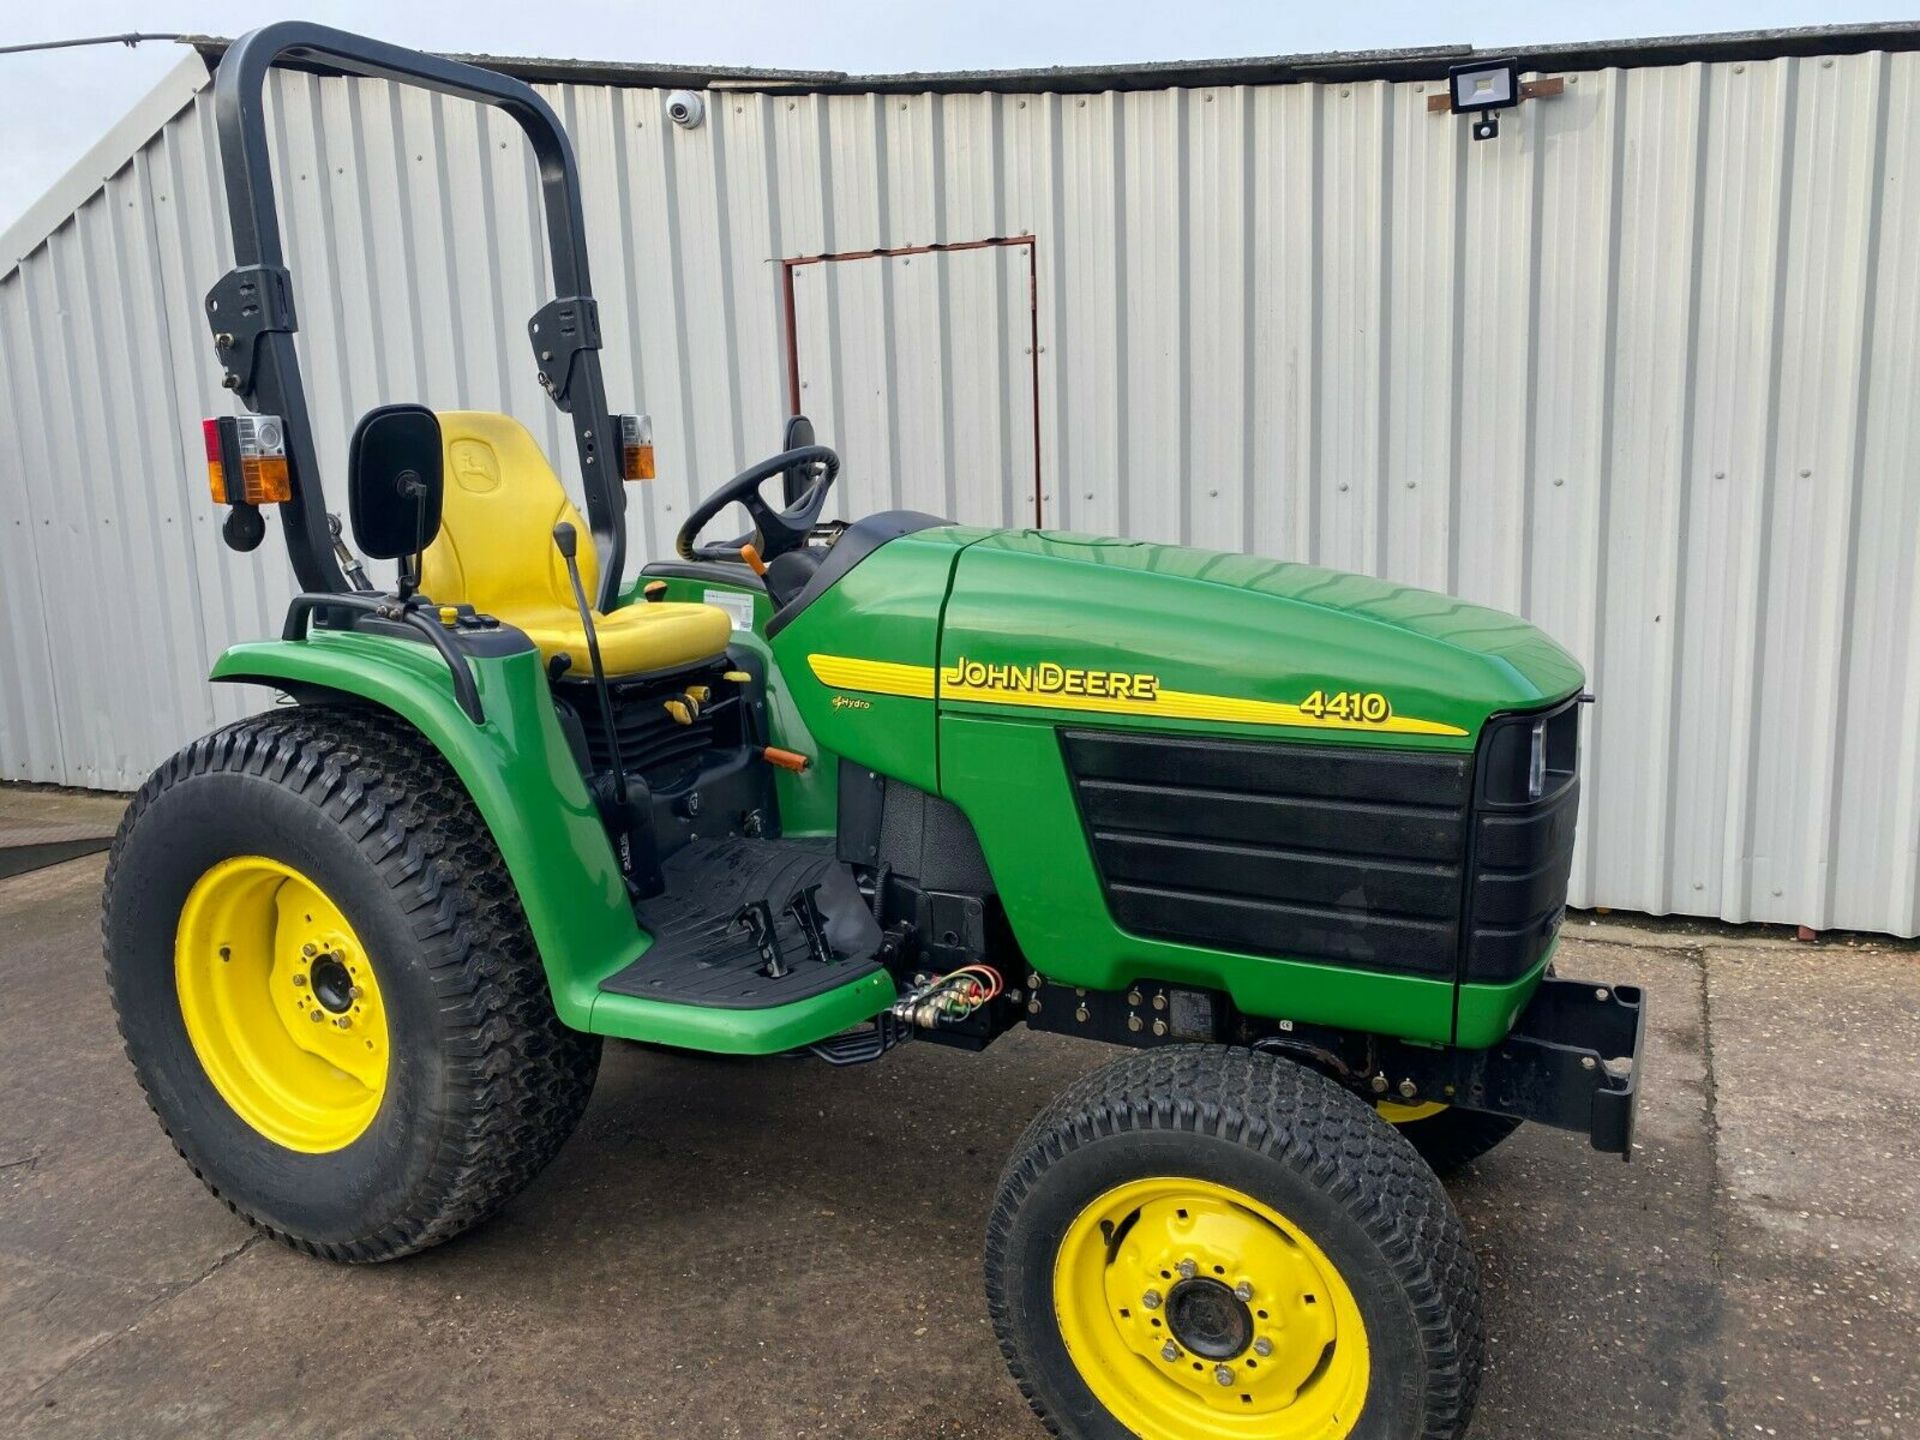 JOHN DEERE COMPACT TRACTOR 4410, 1 OWNER FROM NEW, 4X4, HYDROSTATIC DRIVE *PLUS VAT*